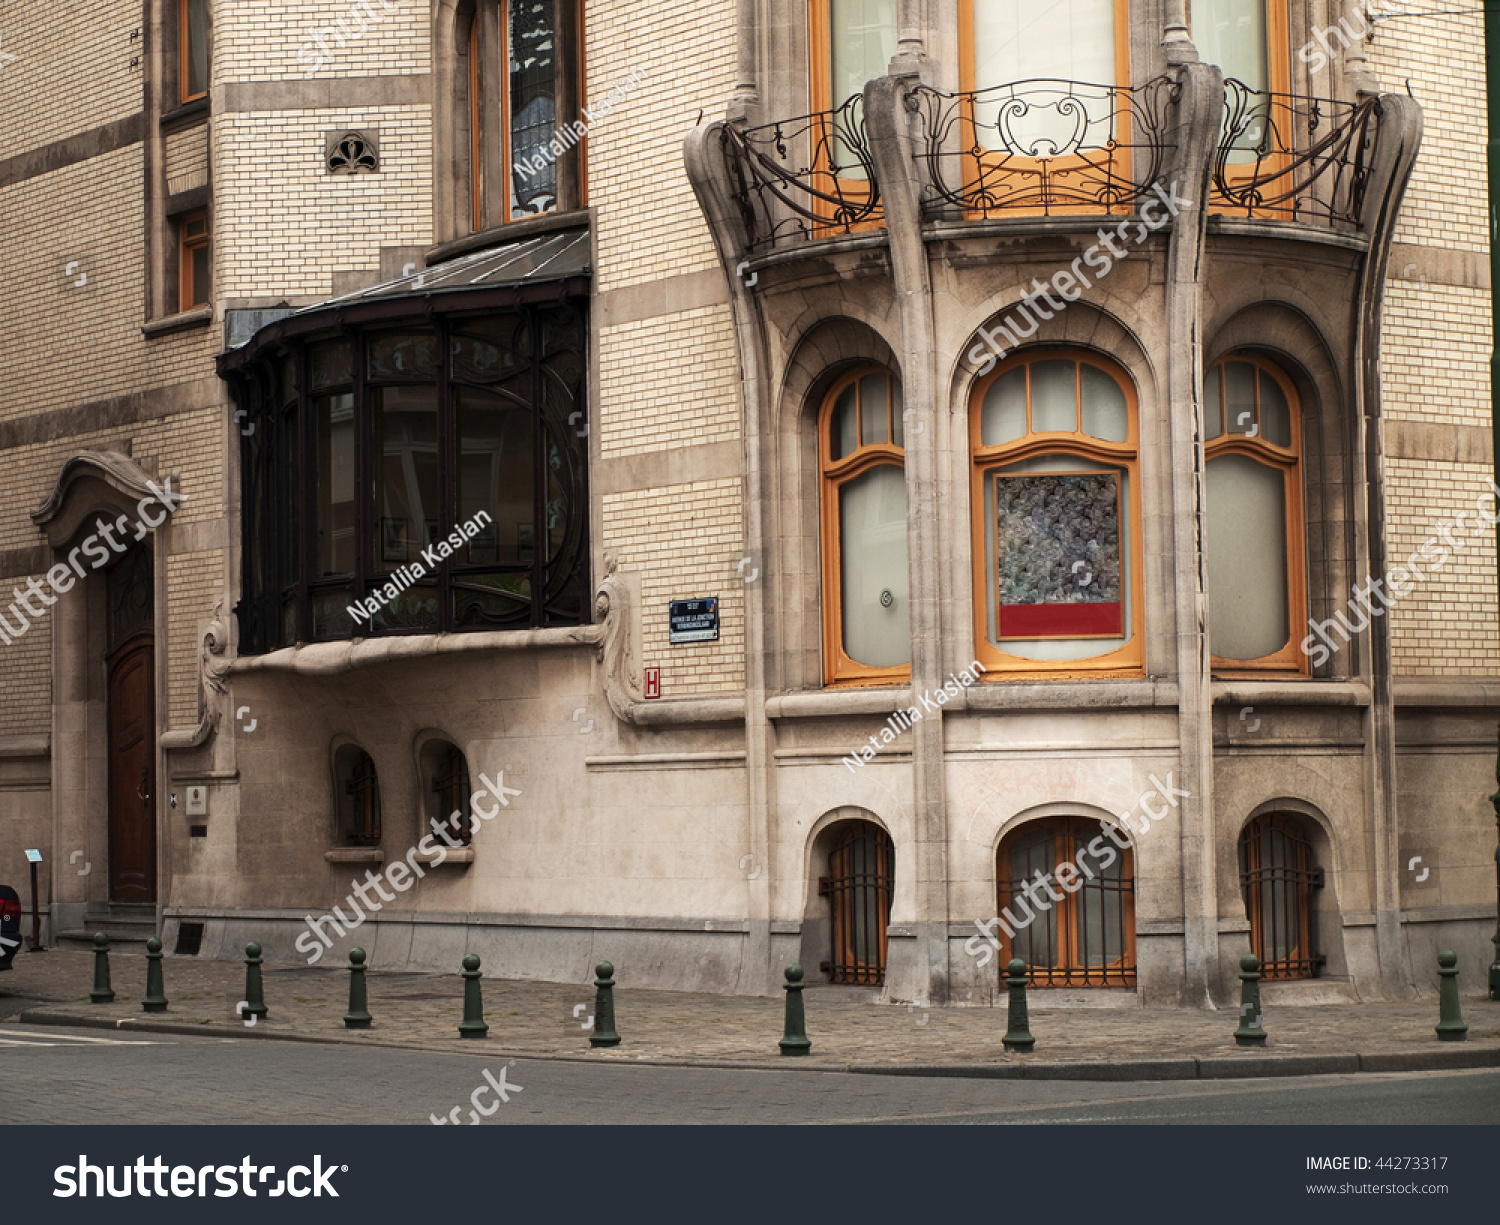 Facade of one of the Brussels buildings in Art Nouveau style #44273317